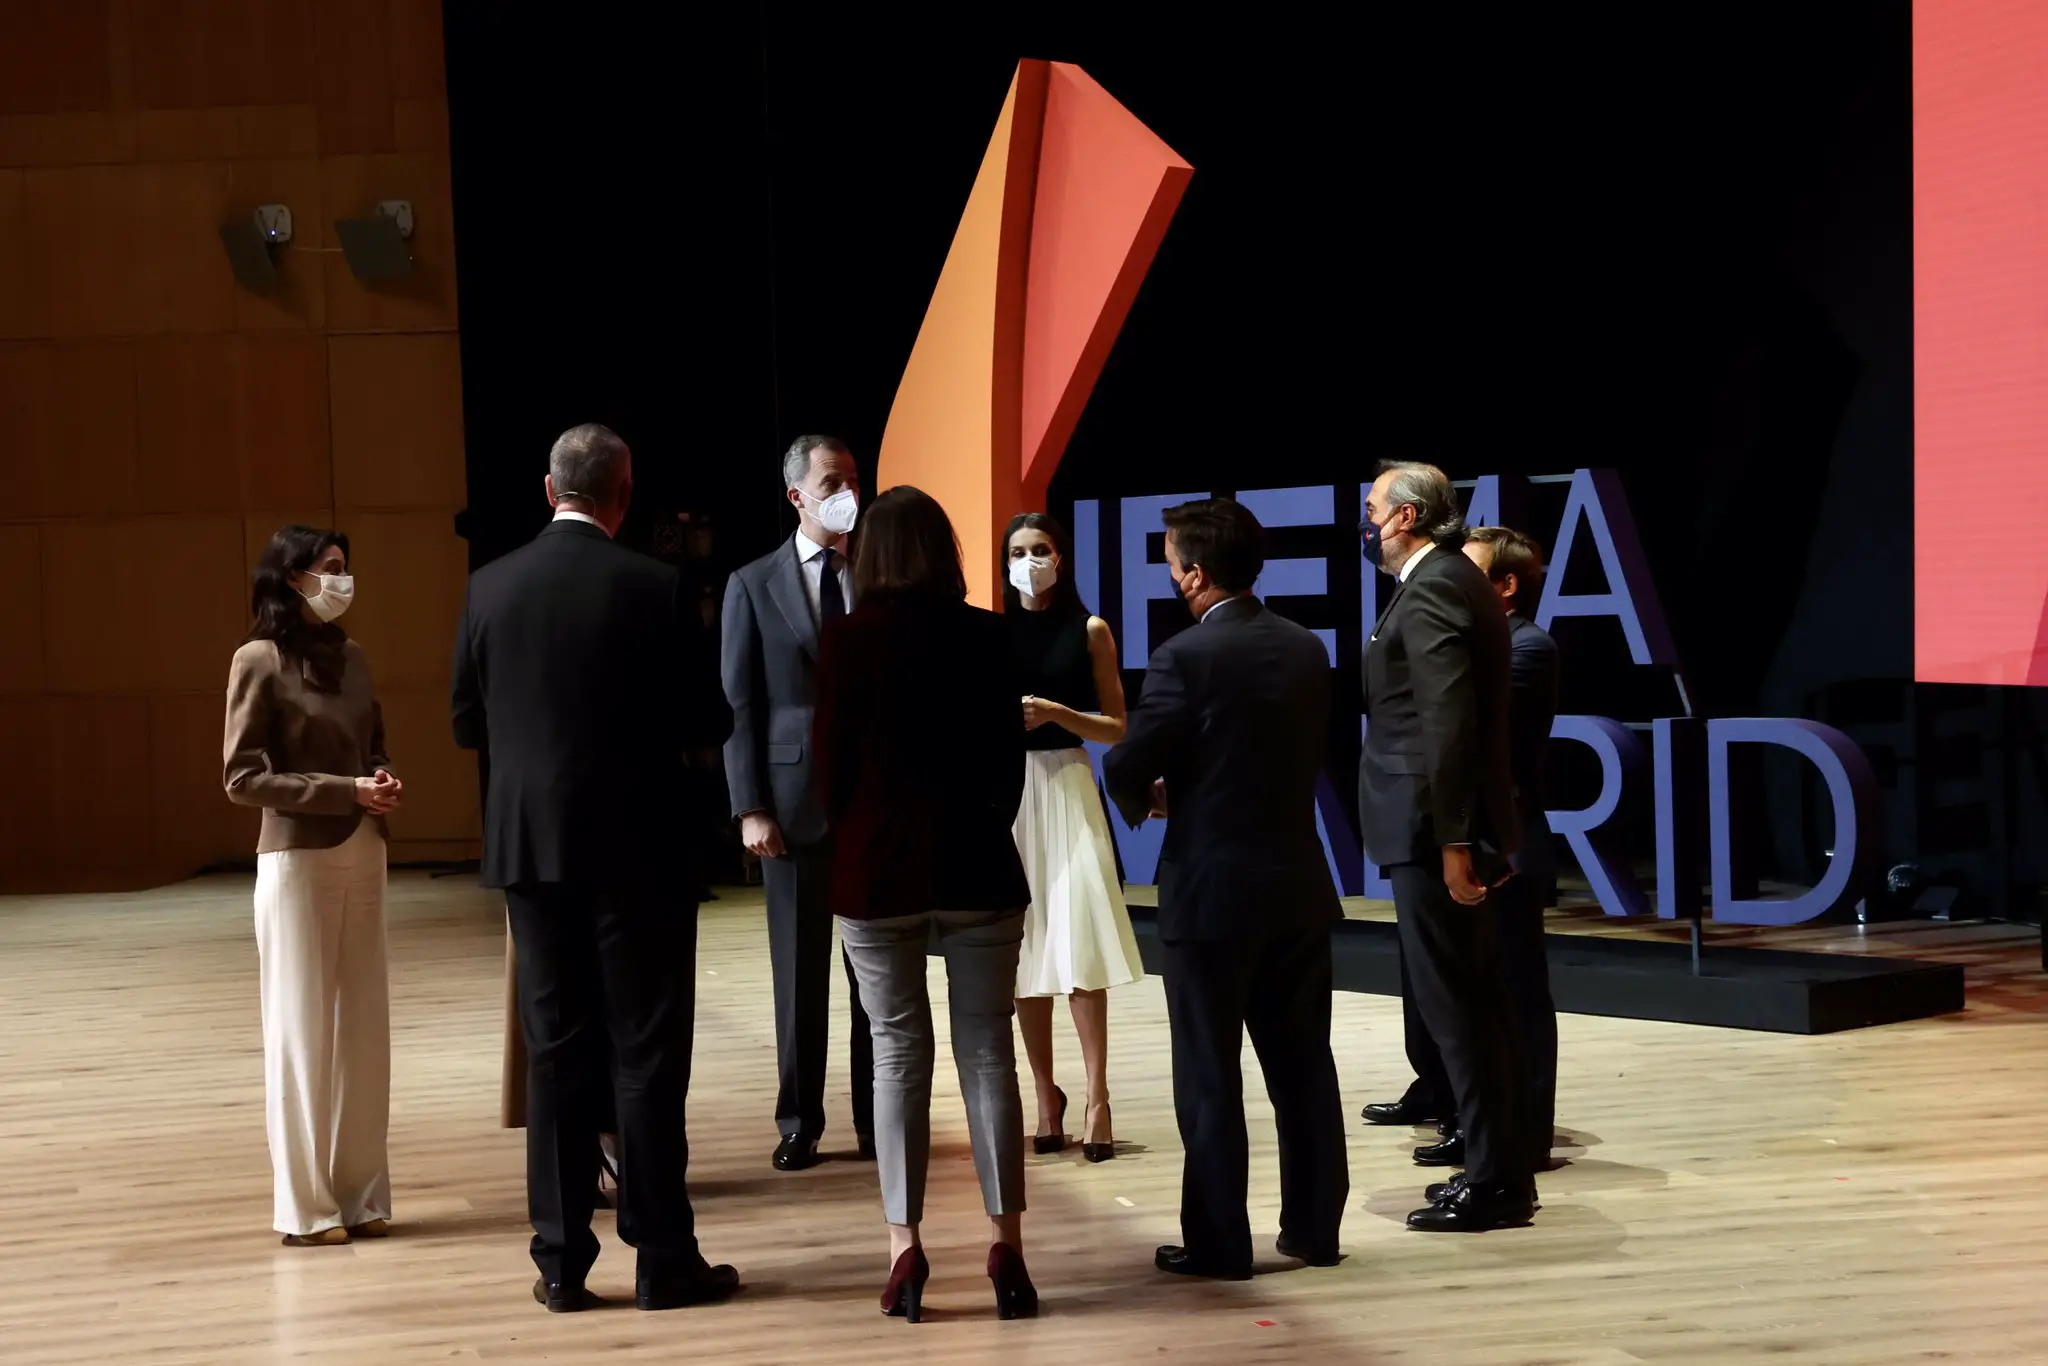 King Felipe and Queen Letizia presided over the presentation ceremony for the launch of the new IFEMA brand